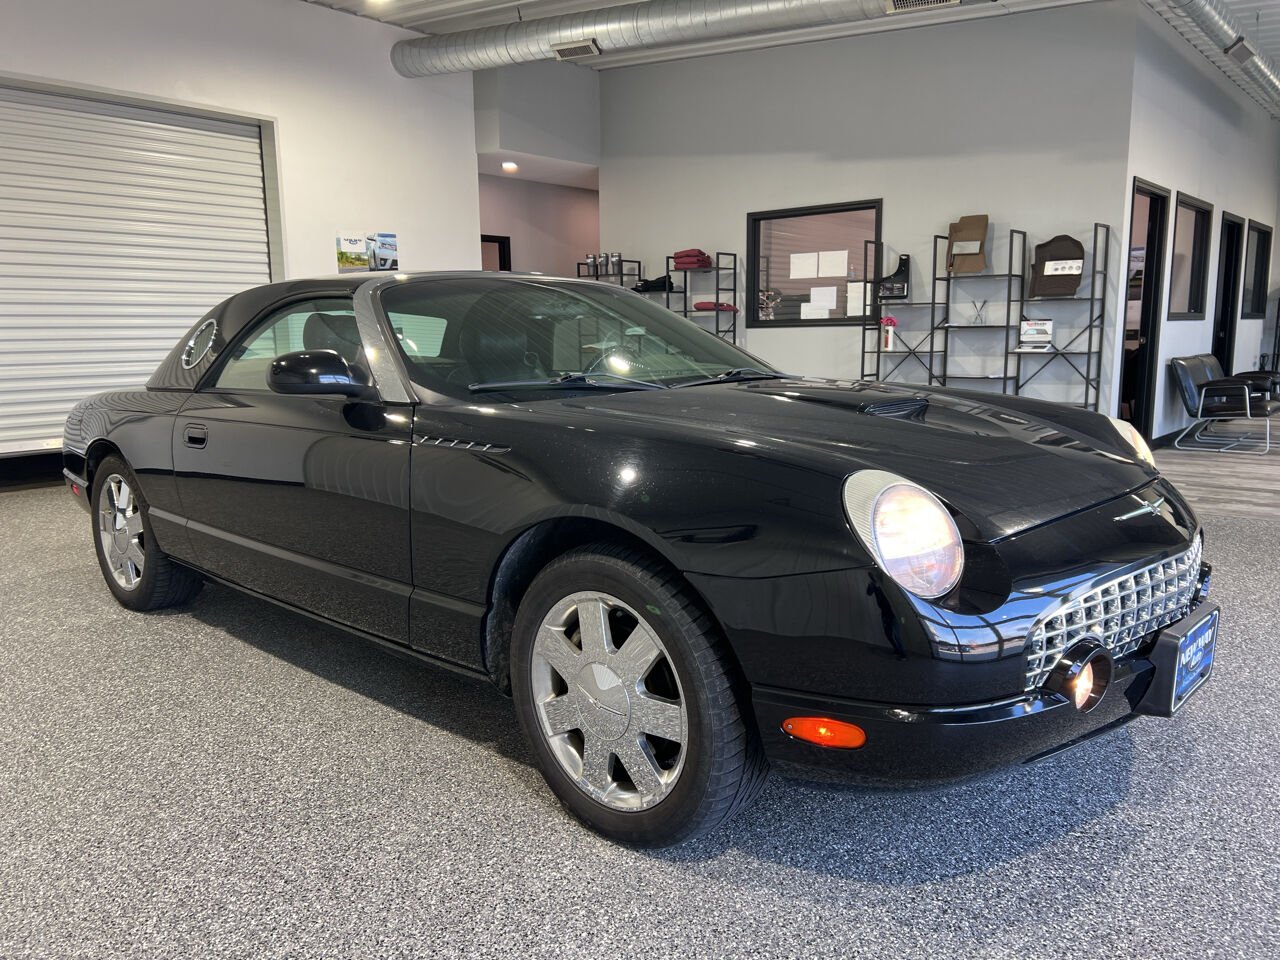 Used 2002 Ford Thunderbird Deluxe with VIN 1FAHP60A62Y128375 for sale in Jefferson, IA